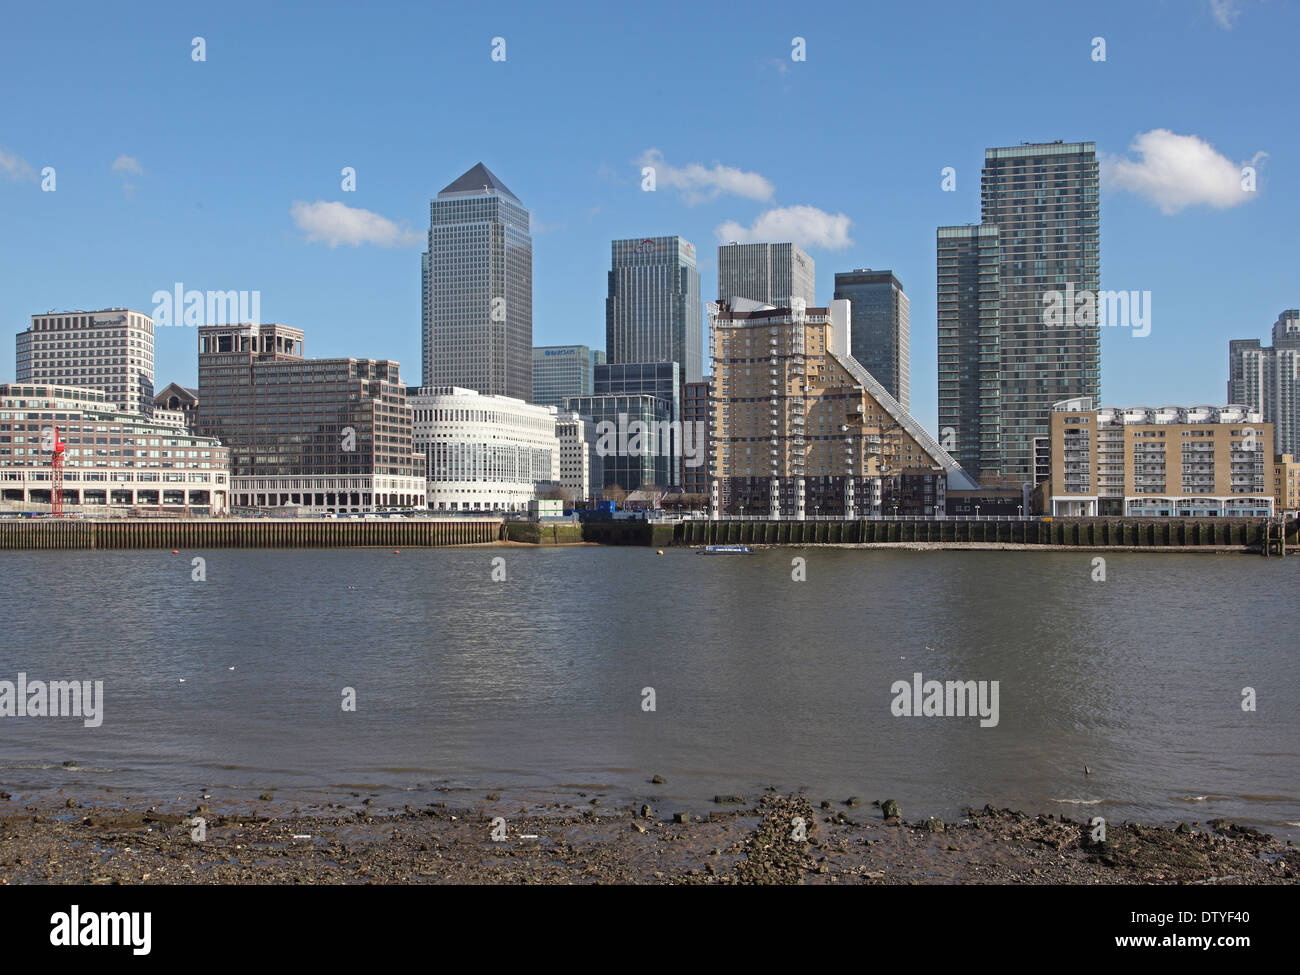 London's Canary Wharf development viewed from the South side of the River Thames in Rotherhithe Stock Photo